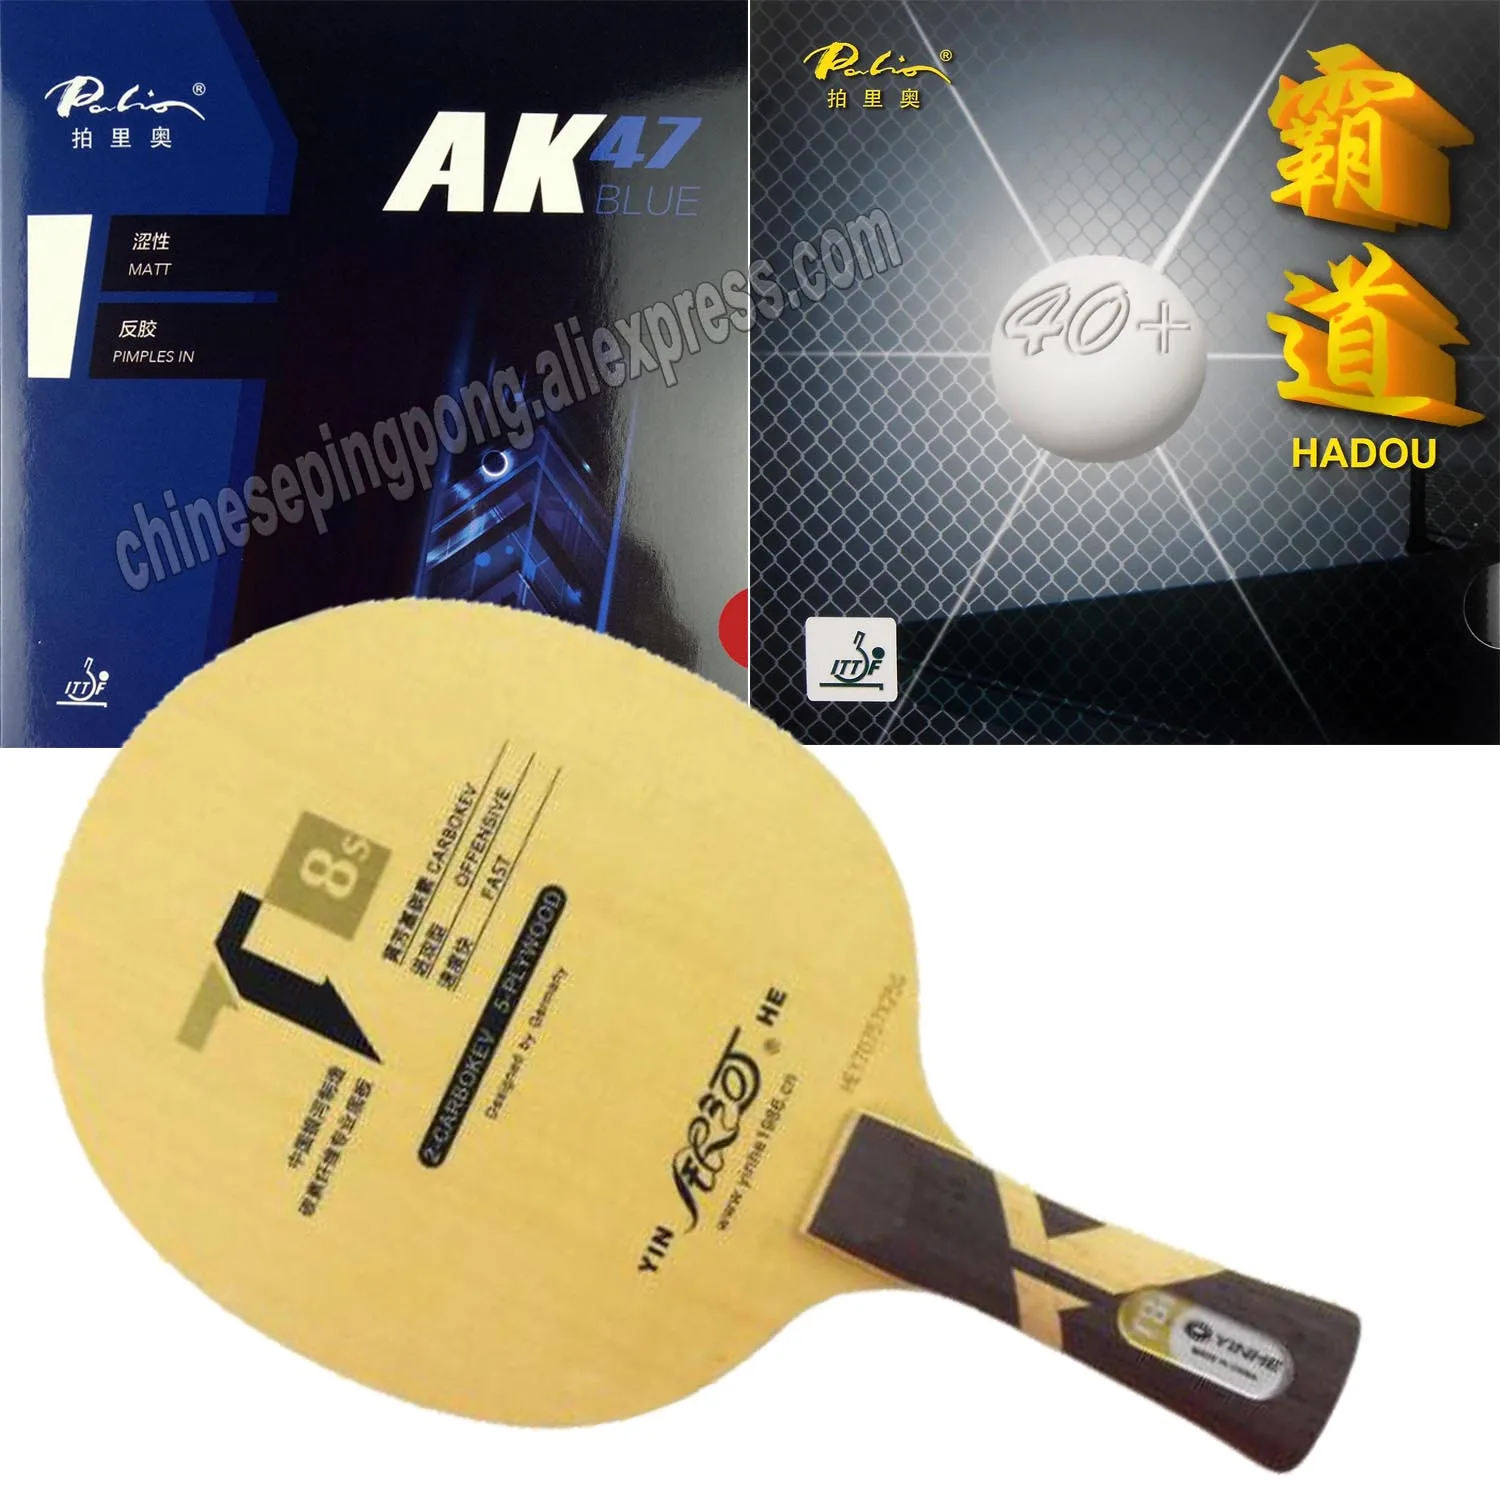 Pro Table Tennis Combo Racket YINHE T8s with Palio AK47BLUE Matt and 40+ hadou PingPong Rubber With Sponge